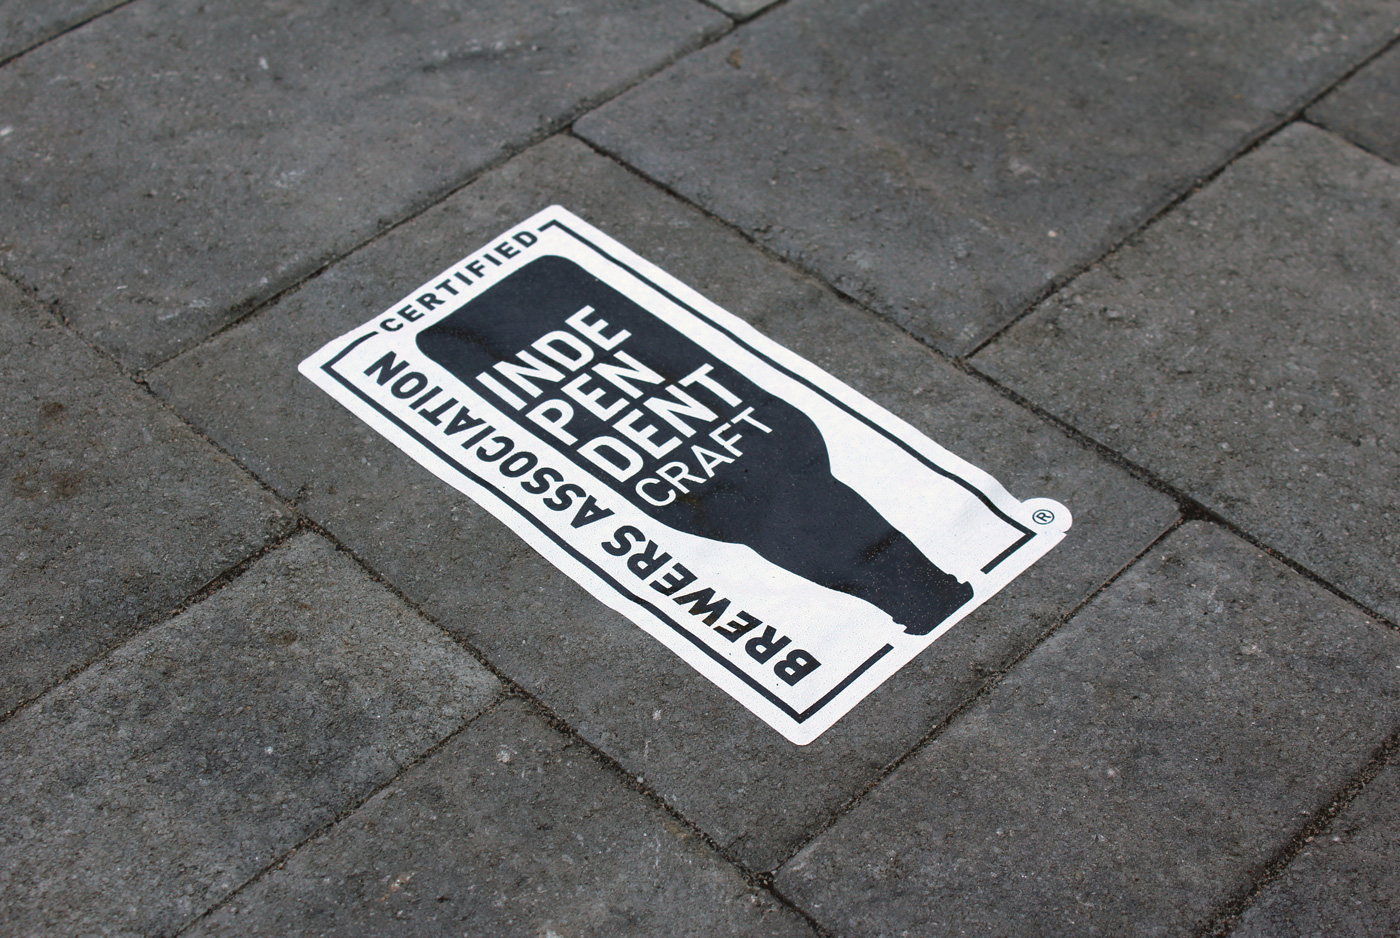 Brewery Floor Decal on Concrete Paver Stones